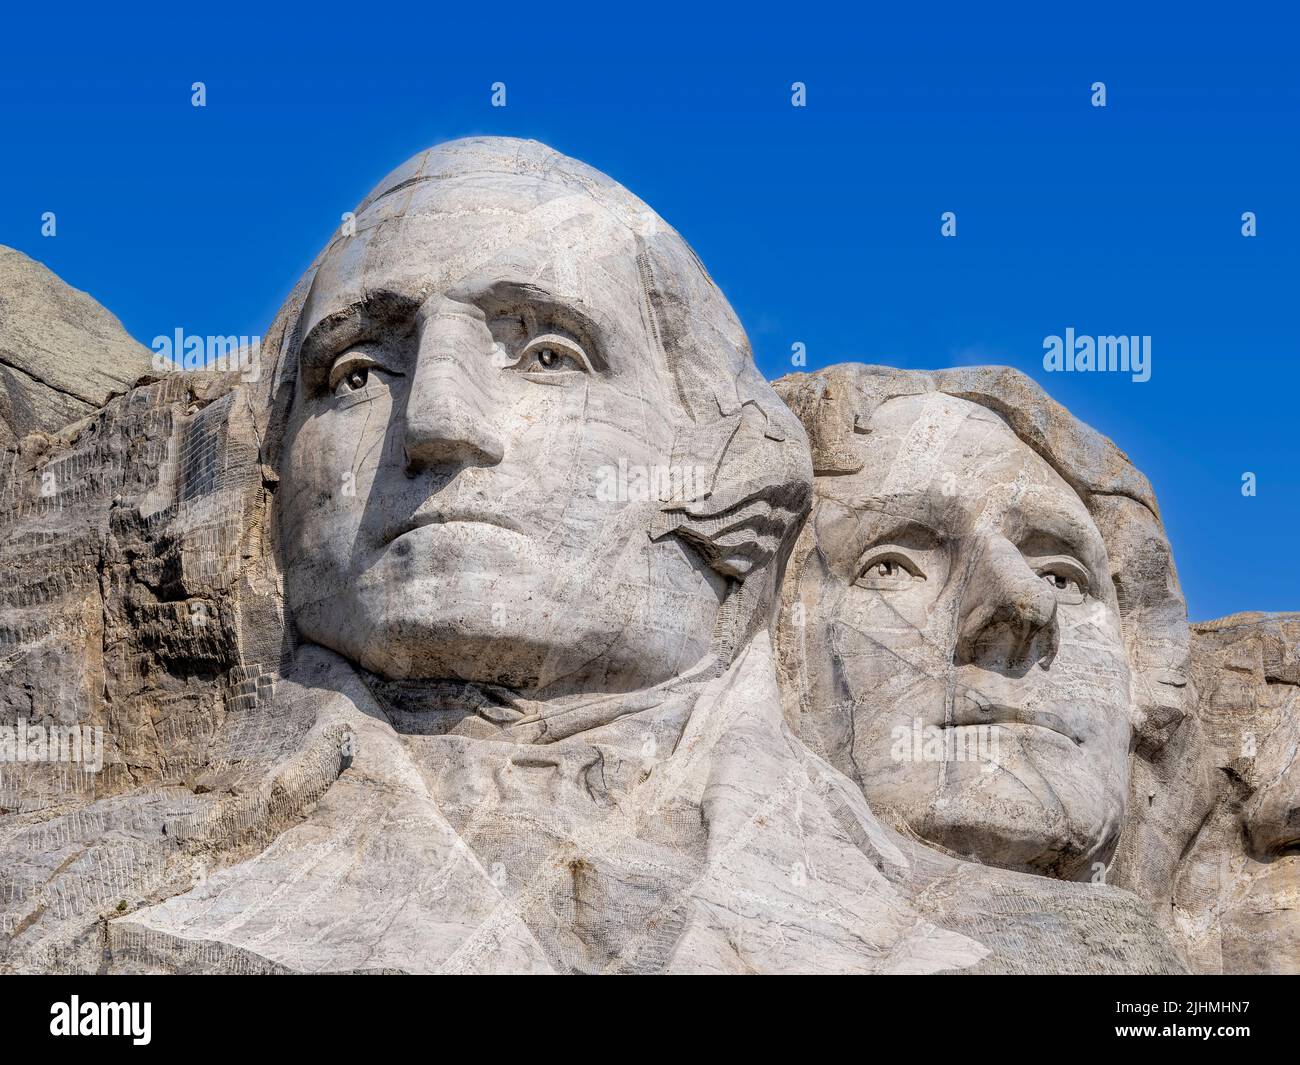 Claoe-up of Washington and Jefferson sculptures at Mount Rushmore National Memorial in the Black Hills of South Dakota USA Stock Photo